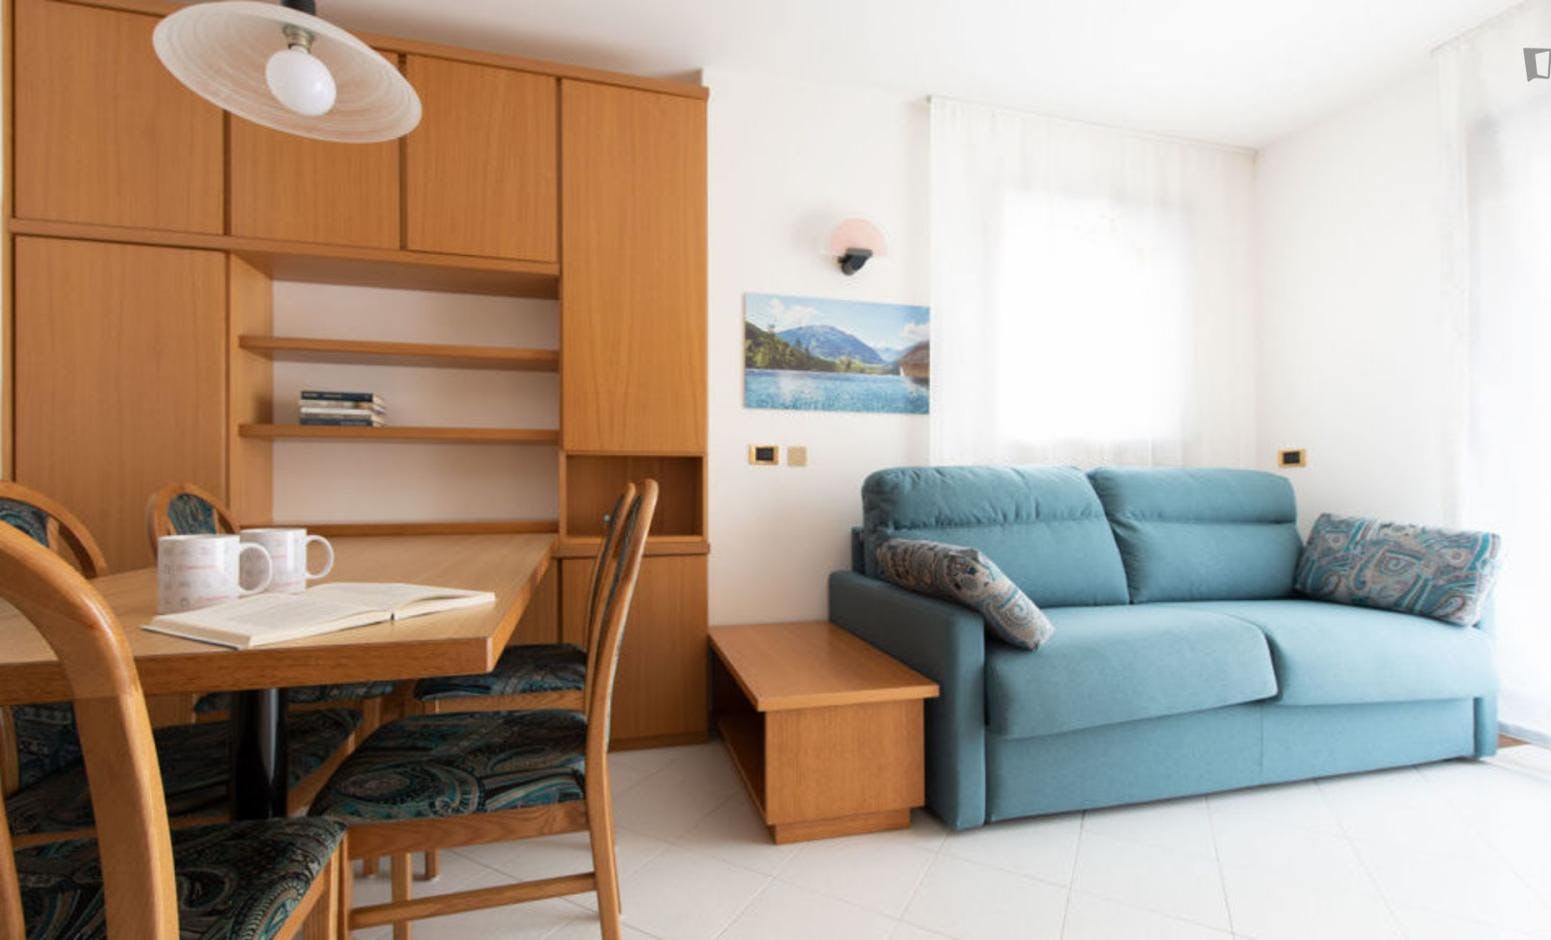 Homely and modern 1-bedroom apartment in Molina